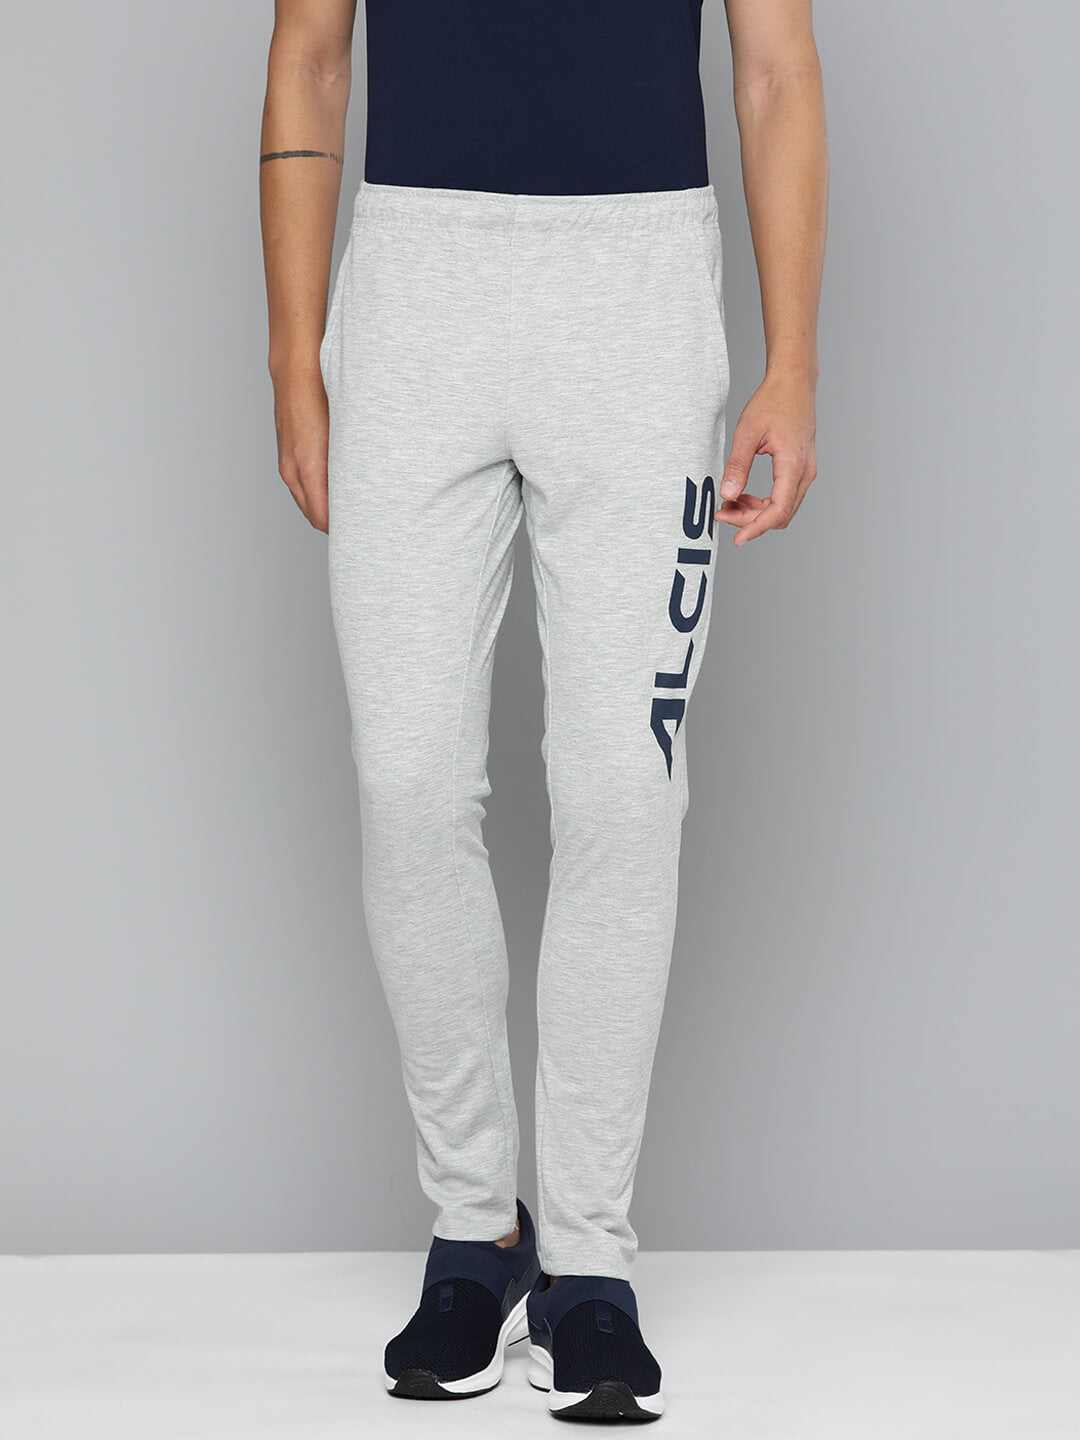 Grey Mens Lightweight And Comfortable Cotton Track Pants For Sports And  Casual Wear at Best Price in Pune | Shiv Shatki Traders